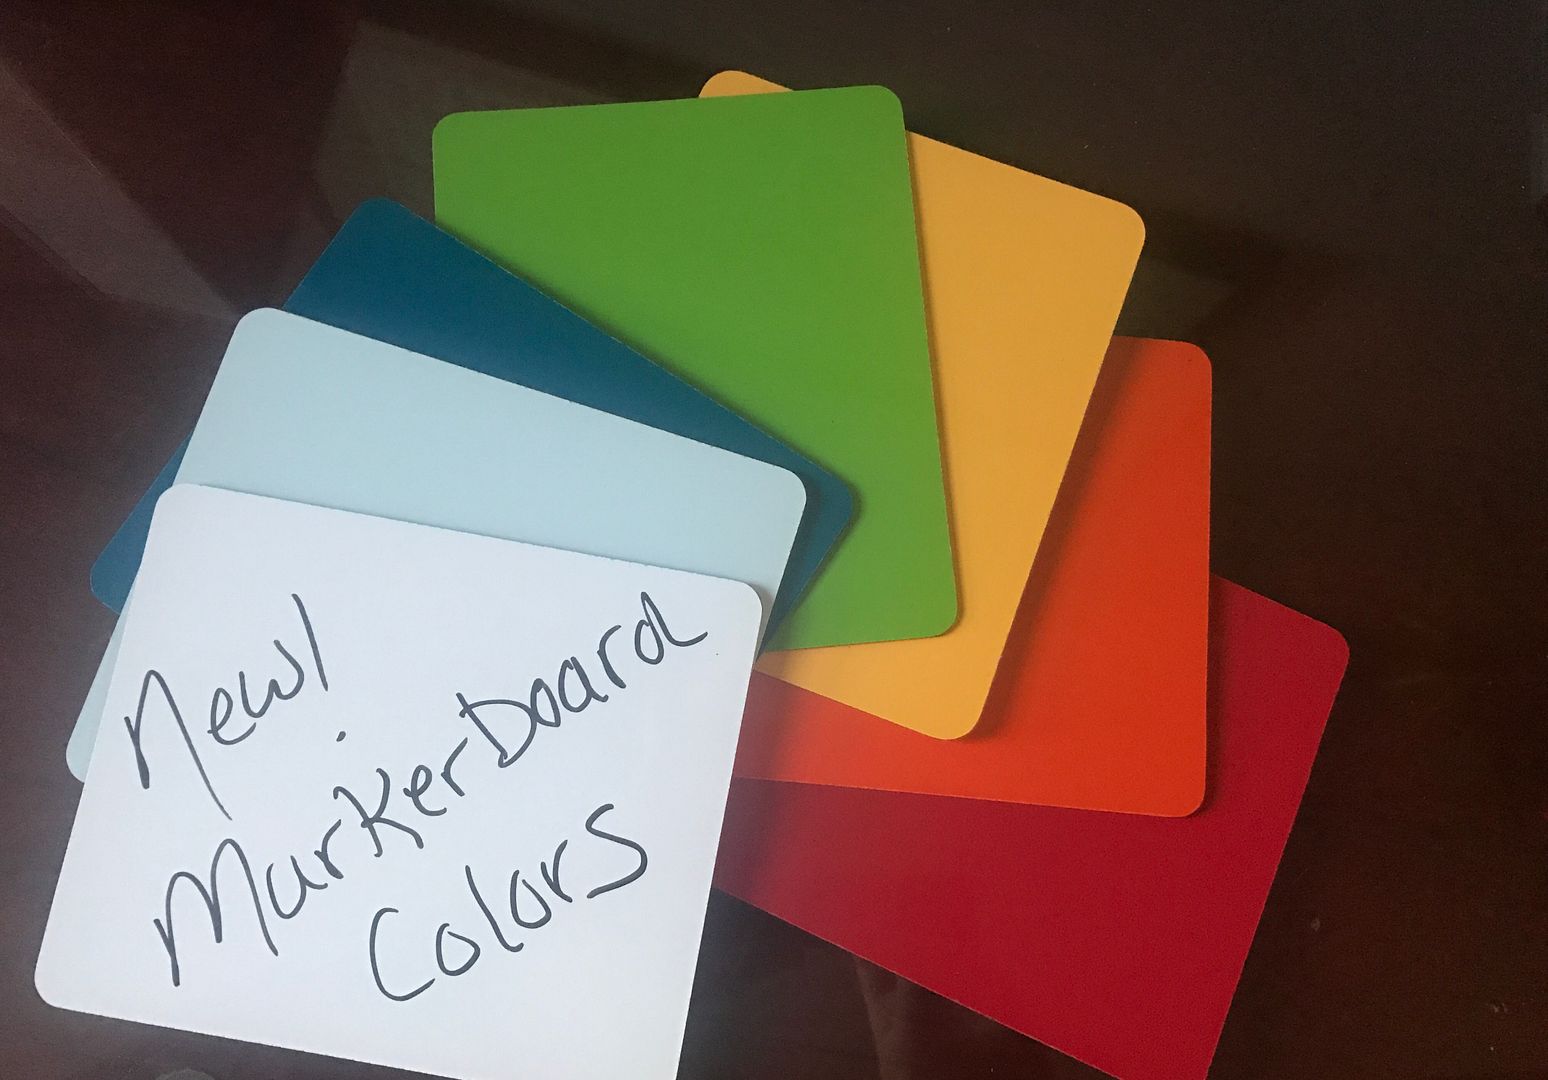 all formica gloss surface colors can now be used as markerboard